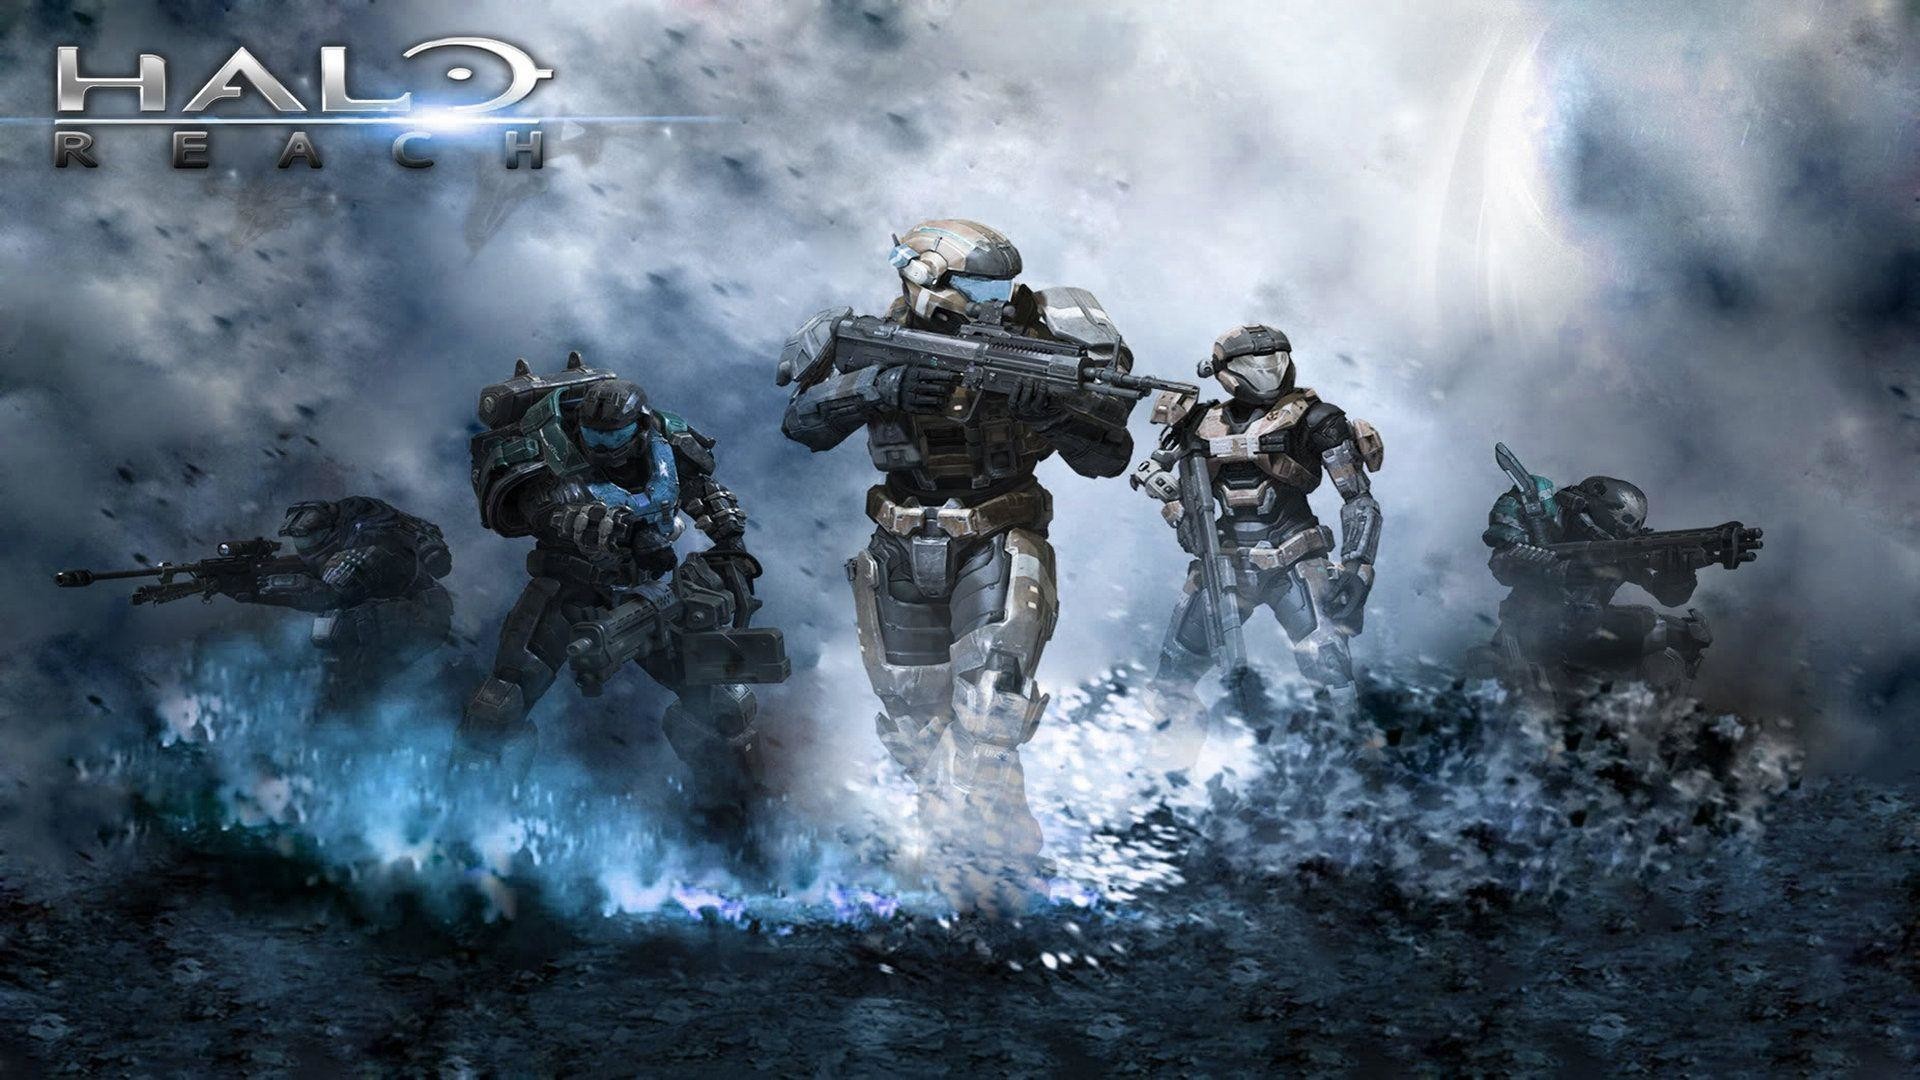 1920x1080  Wallpapers For > Halo Reach Wallpaper Hd 1080p